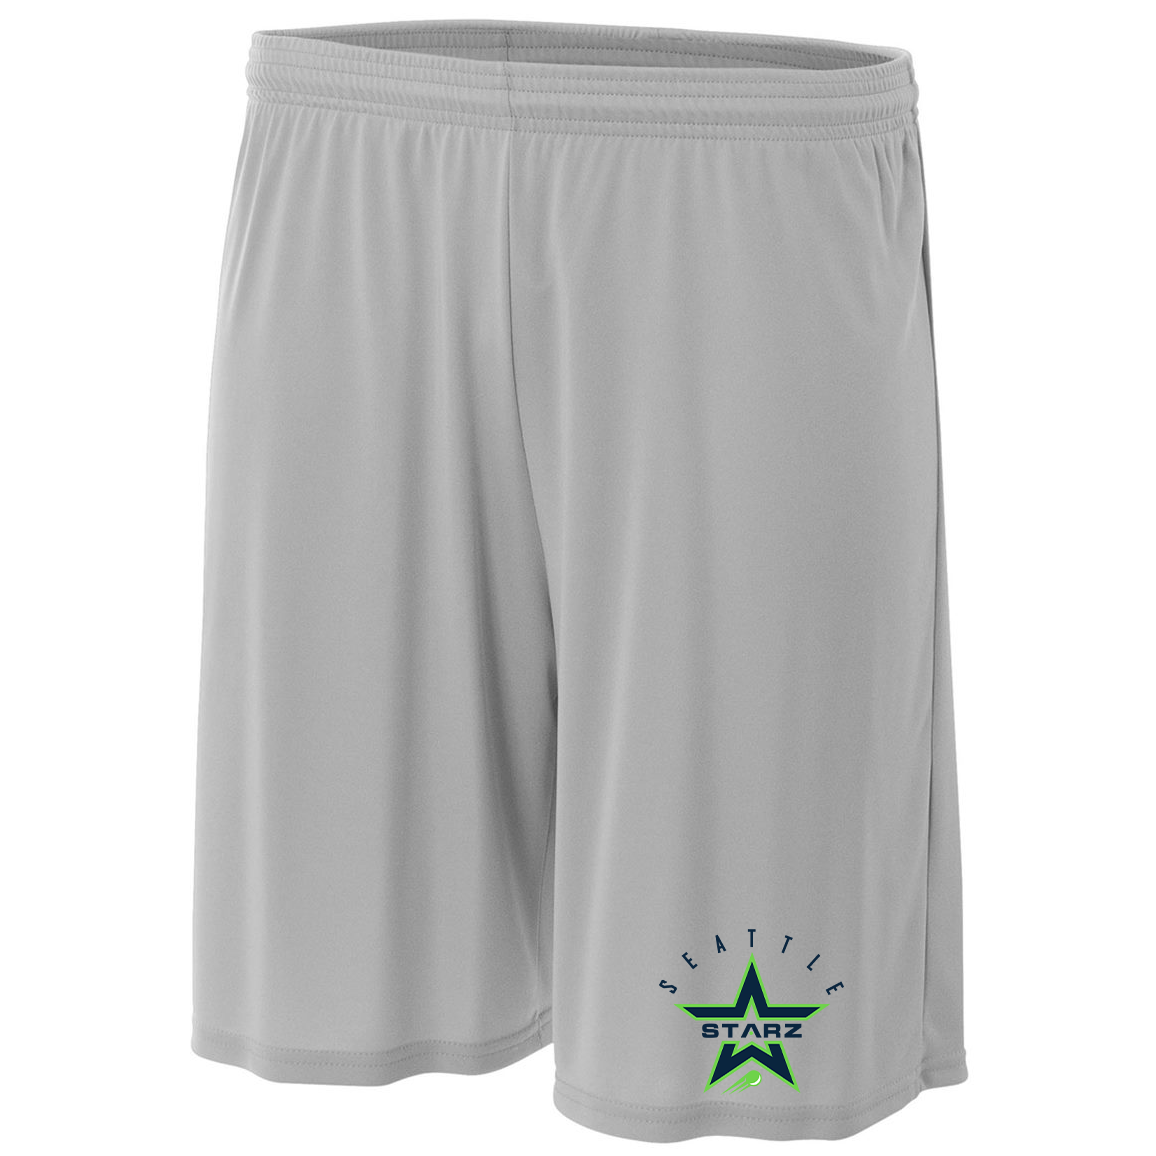 Seattle Starz Lacrosse Club A4 Cooling 7" Performance Shorts